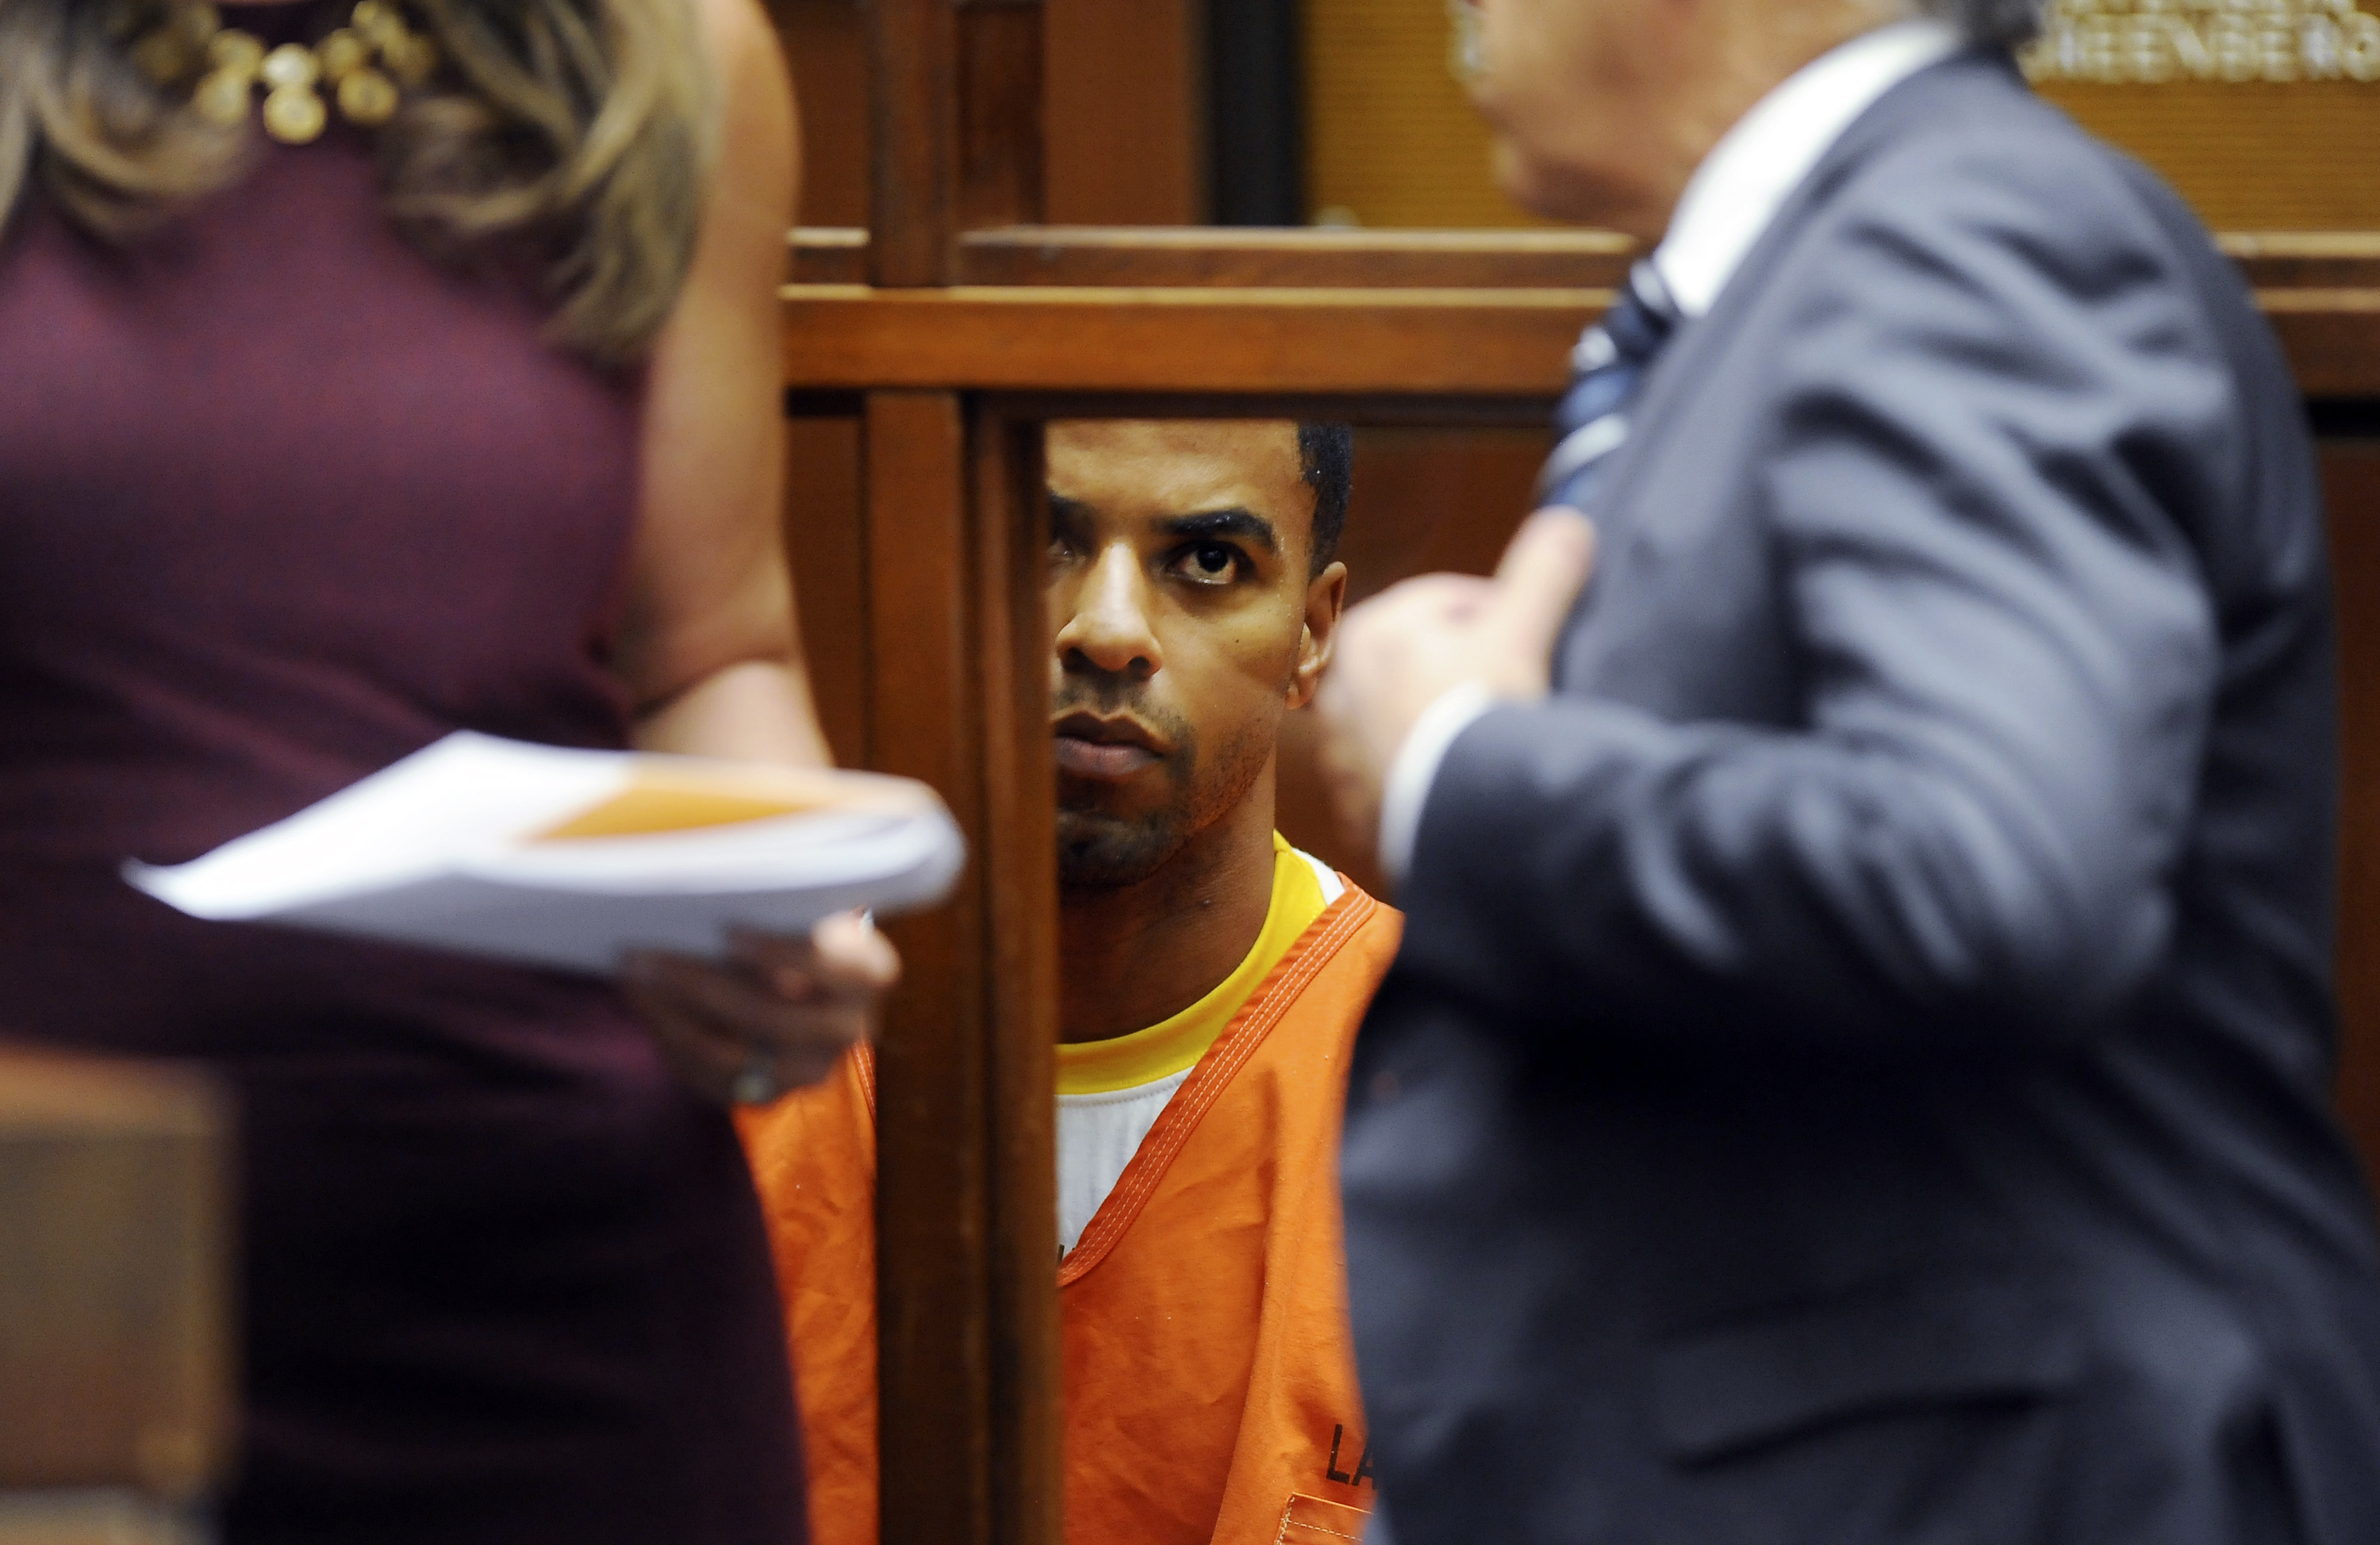 NFL All-Pro safety Darren Sharper appears on Monday, March 24, 2014, in Los Angeles Superior Court in Los Angeles.  (AP Photo/Los Angeles Times, Wally Skalij, Pool)